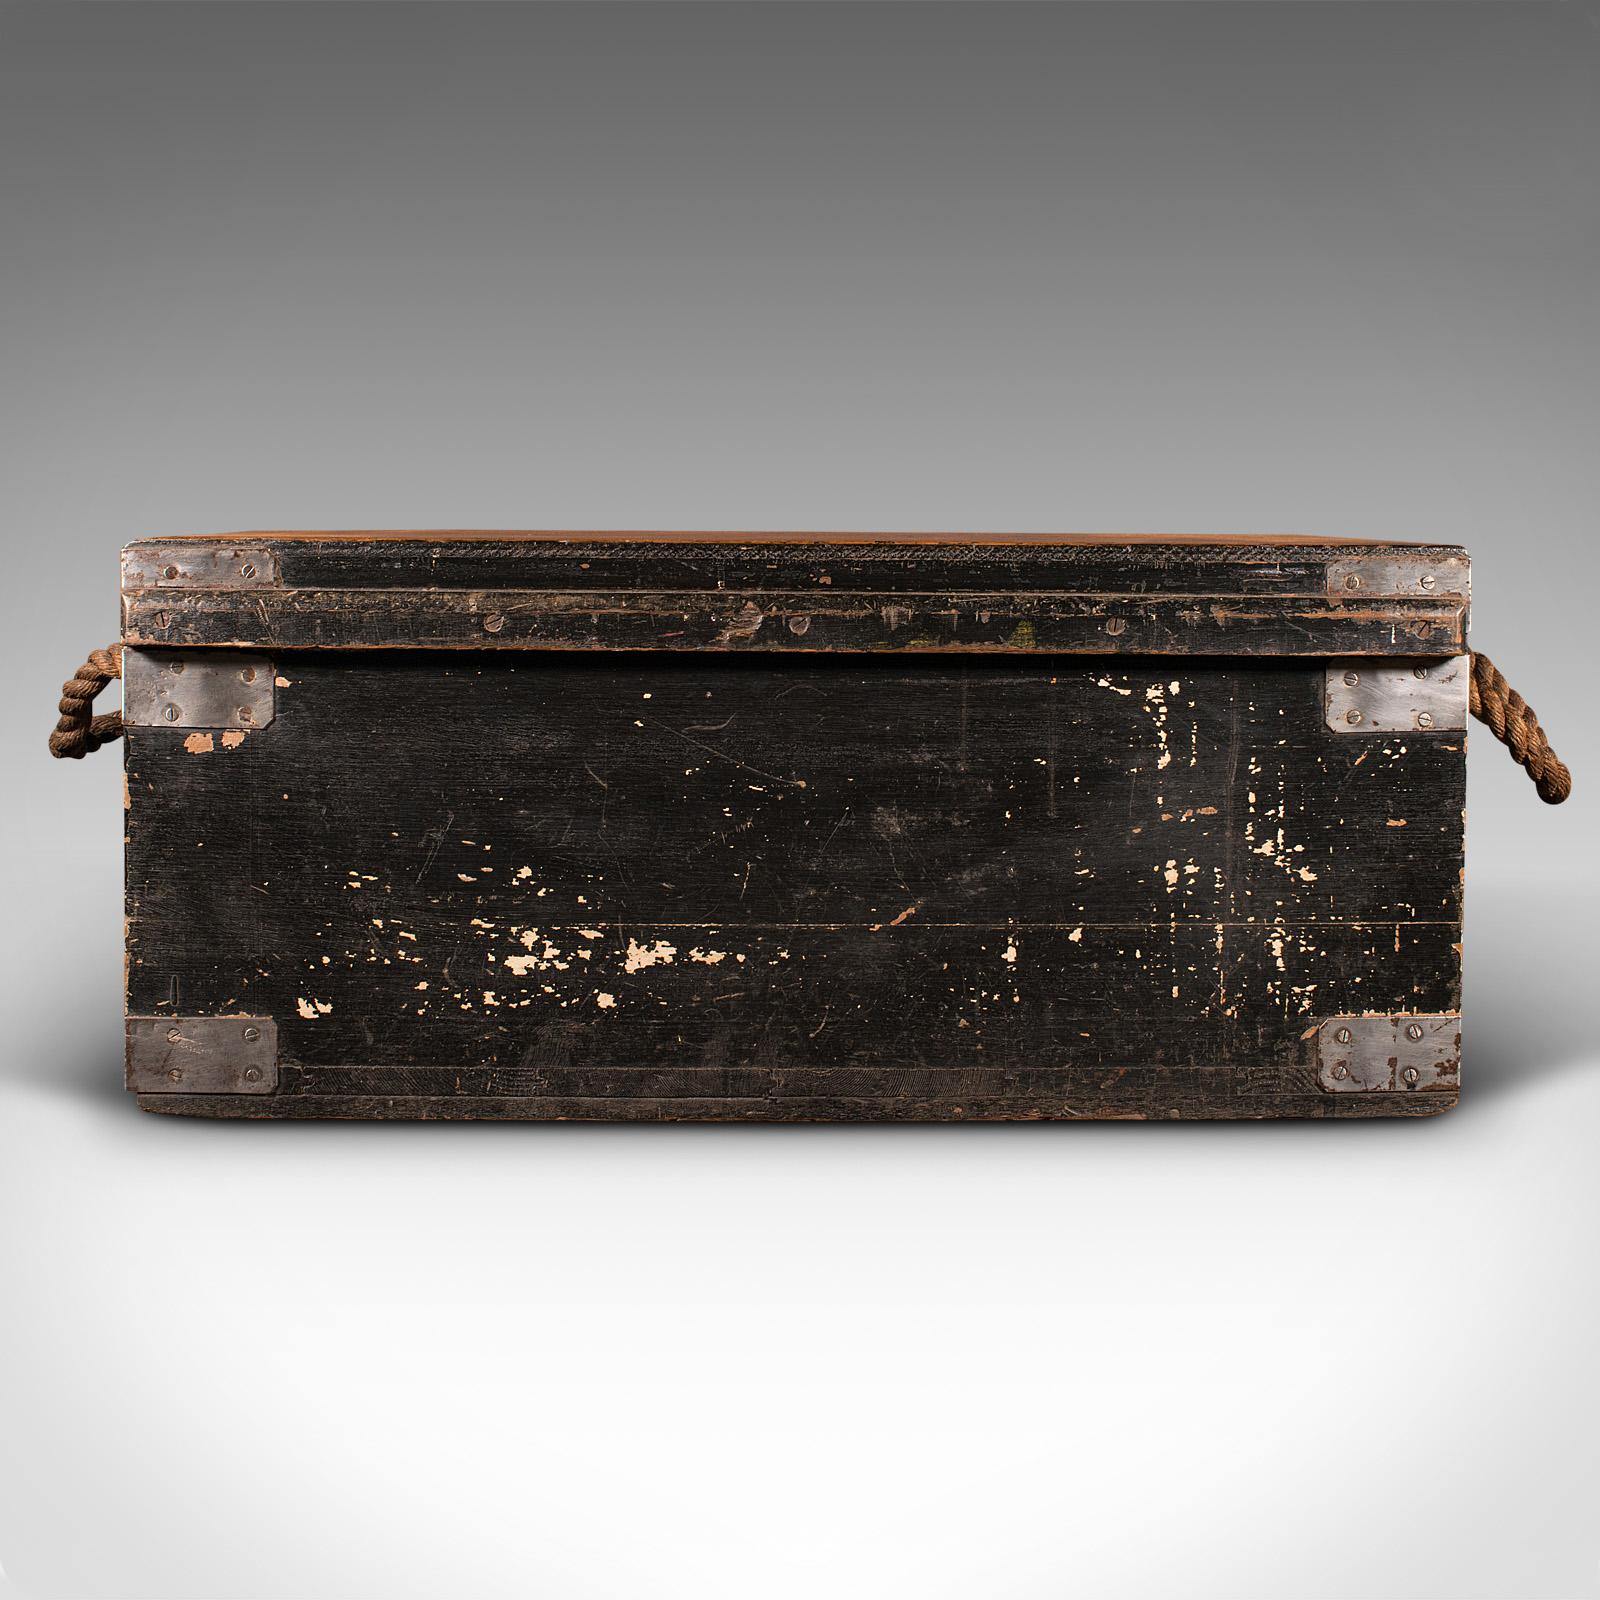 20th Century Vintage Shipwright's Tool Chest, English, Cedar, Pine, Craftsman's Trunk, C.1940 For Sale